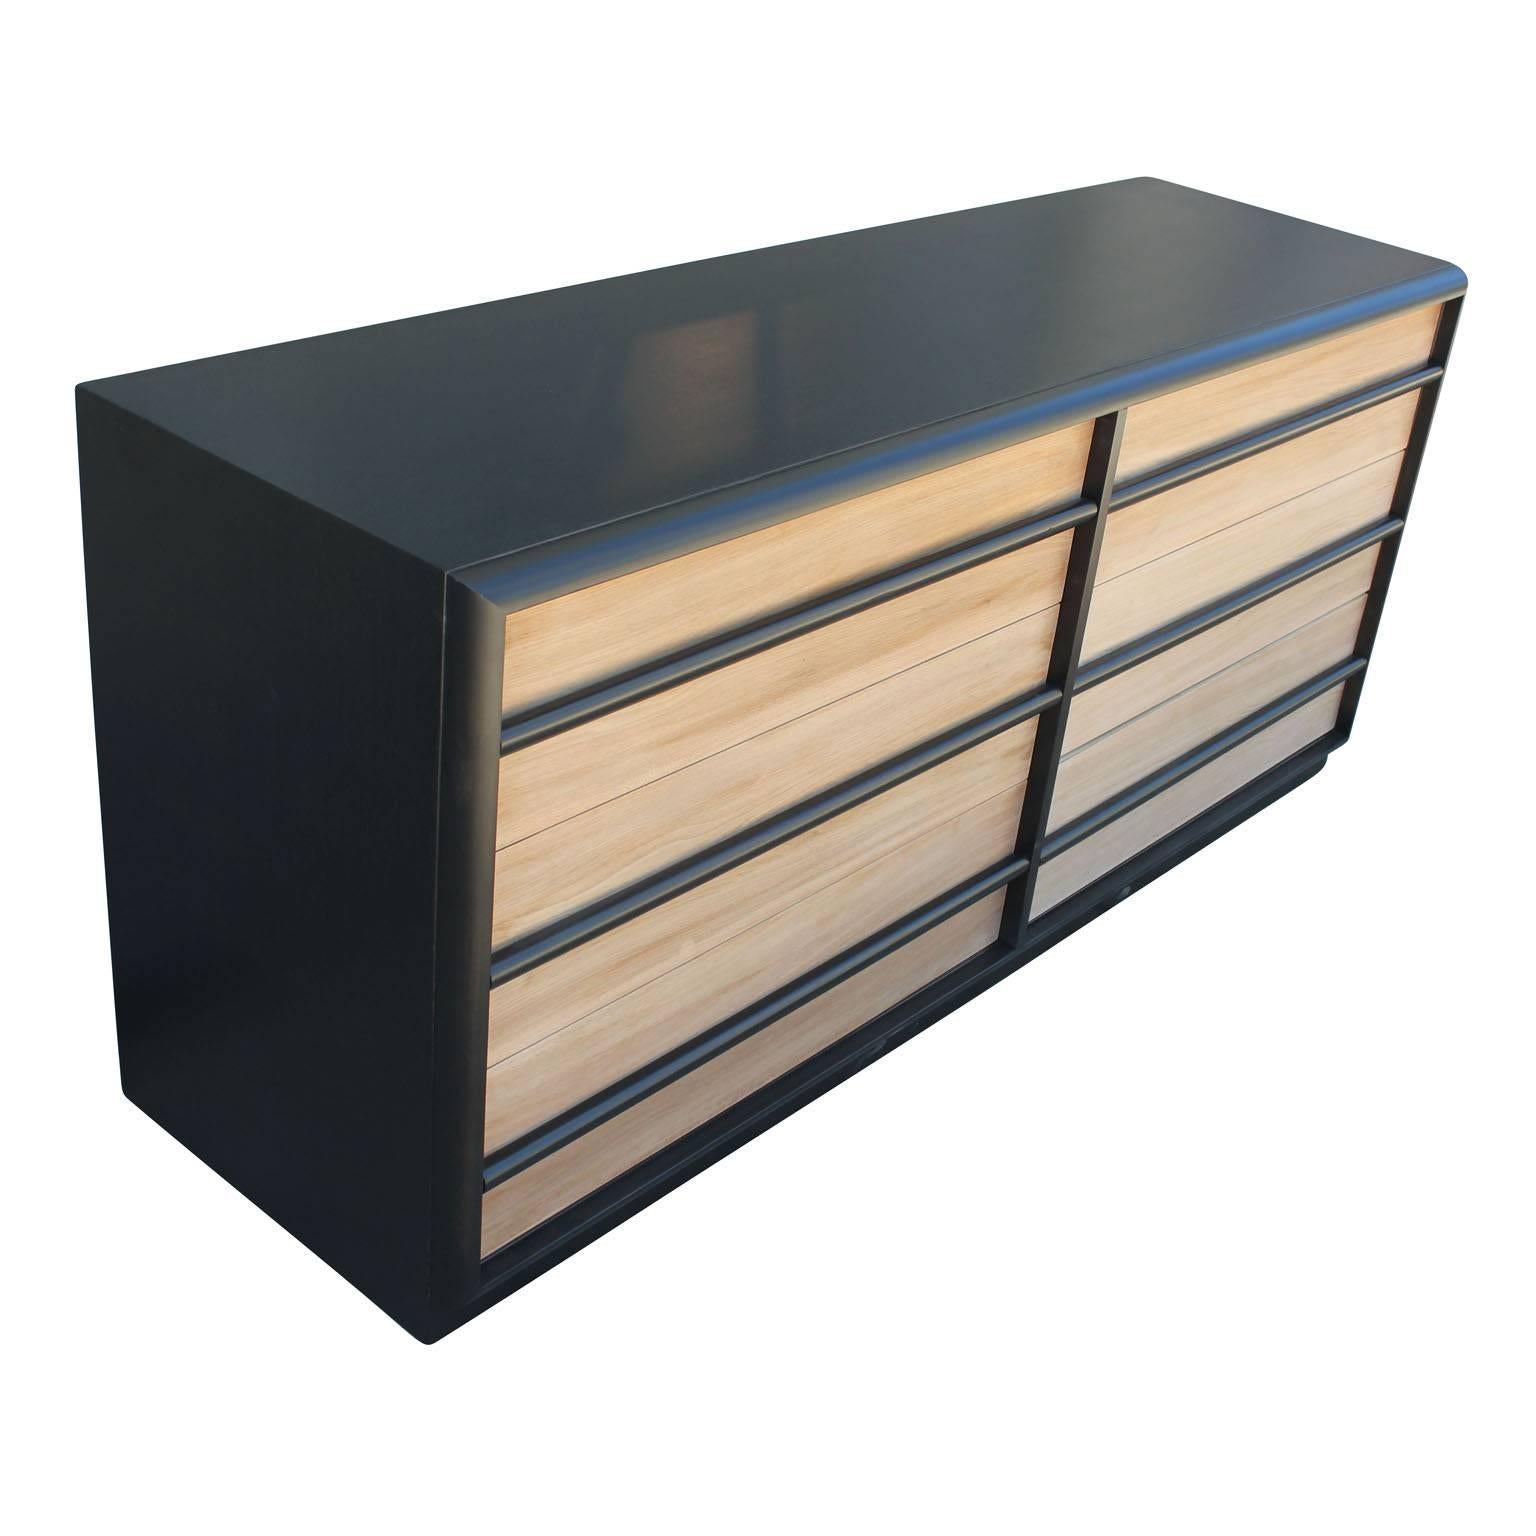 American Modern Two-Toned Six Drawer Dresser with Black and Bleached Wood by Gibbings